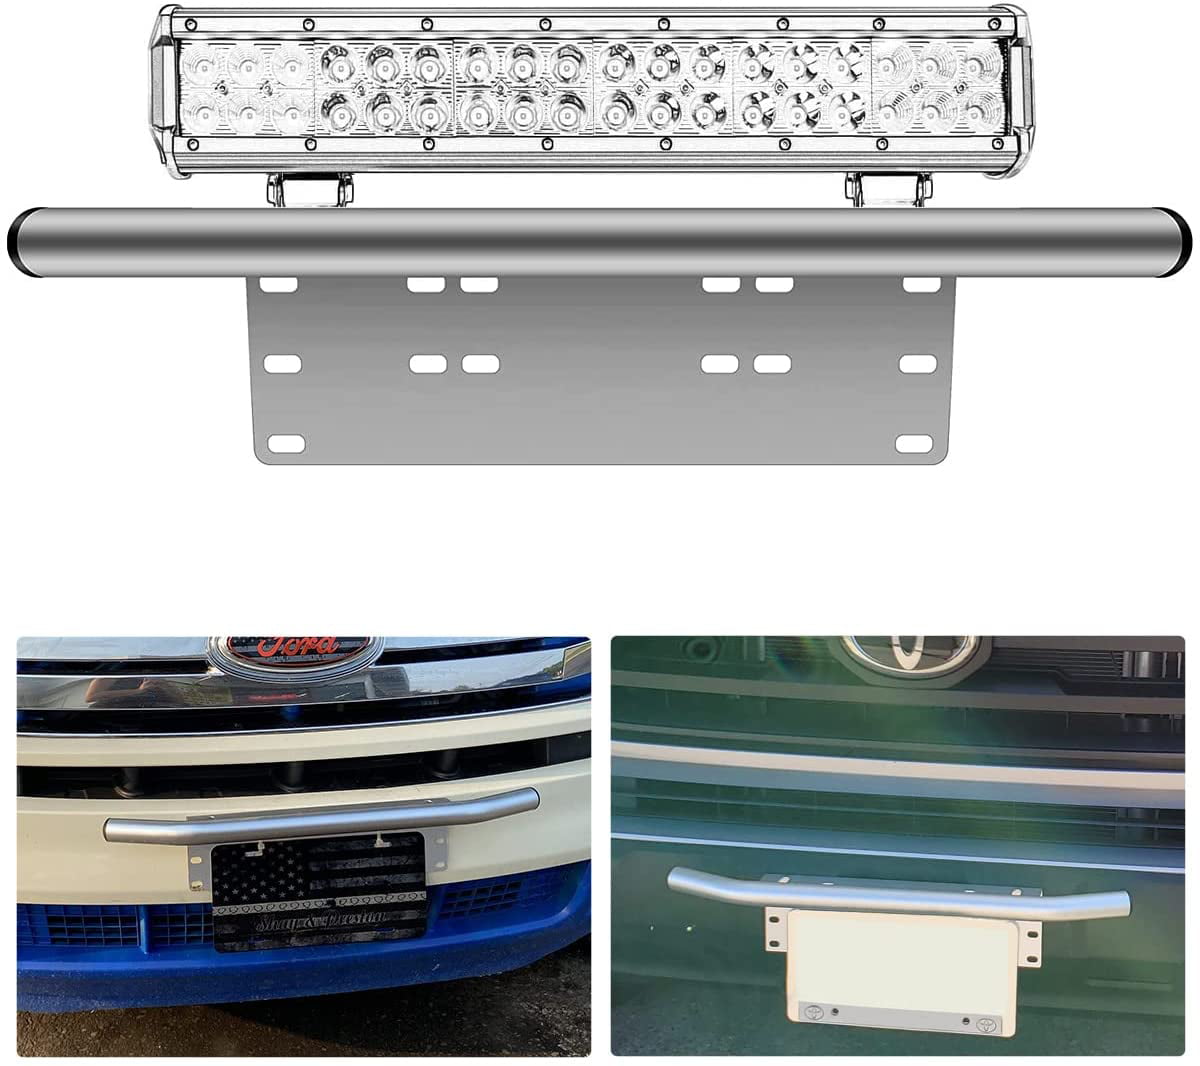 Front Bumper 6x12 inch Universal License Plate Holder Mounting Bracket For Off-Road LED Light Pod Fit Most ATV Jeep Truck Pickup 